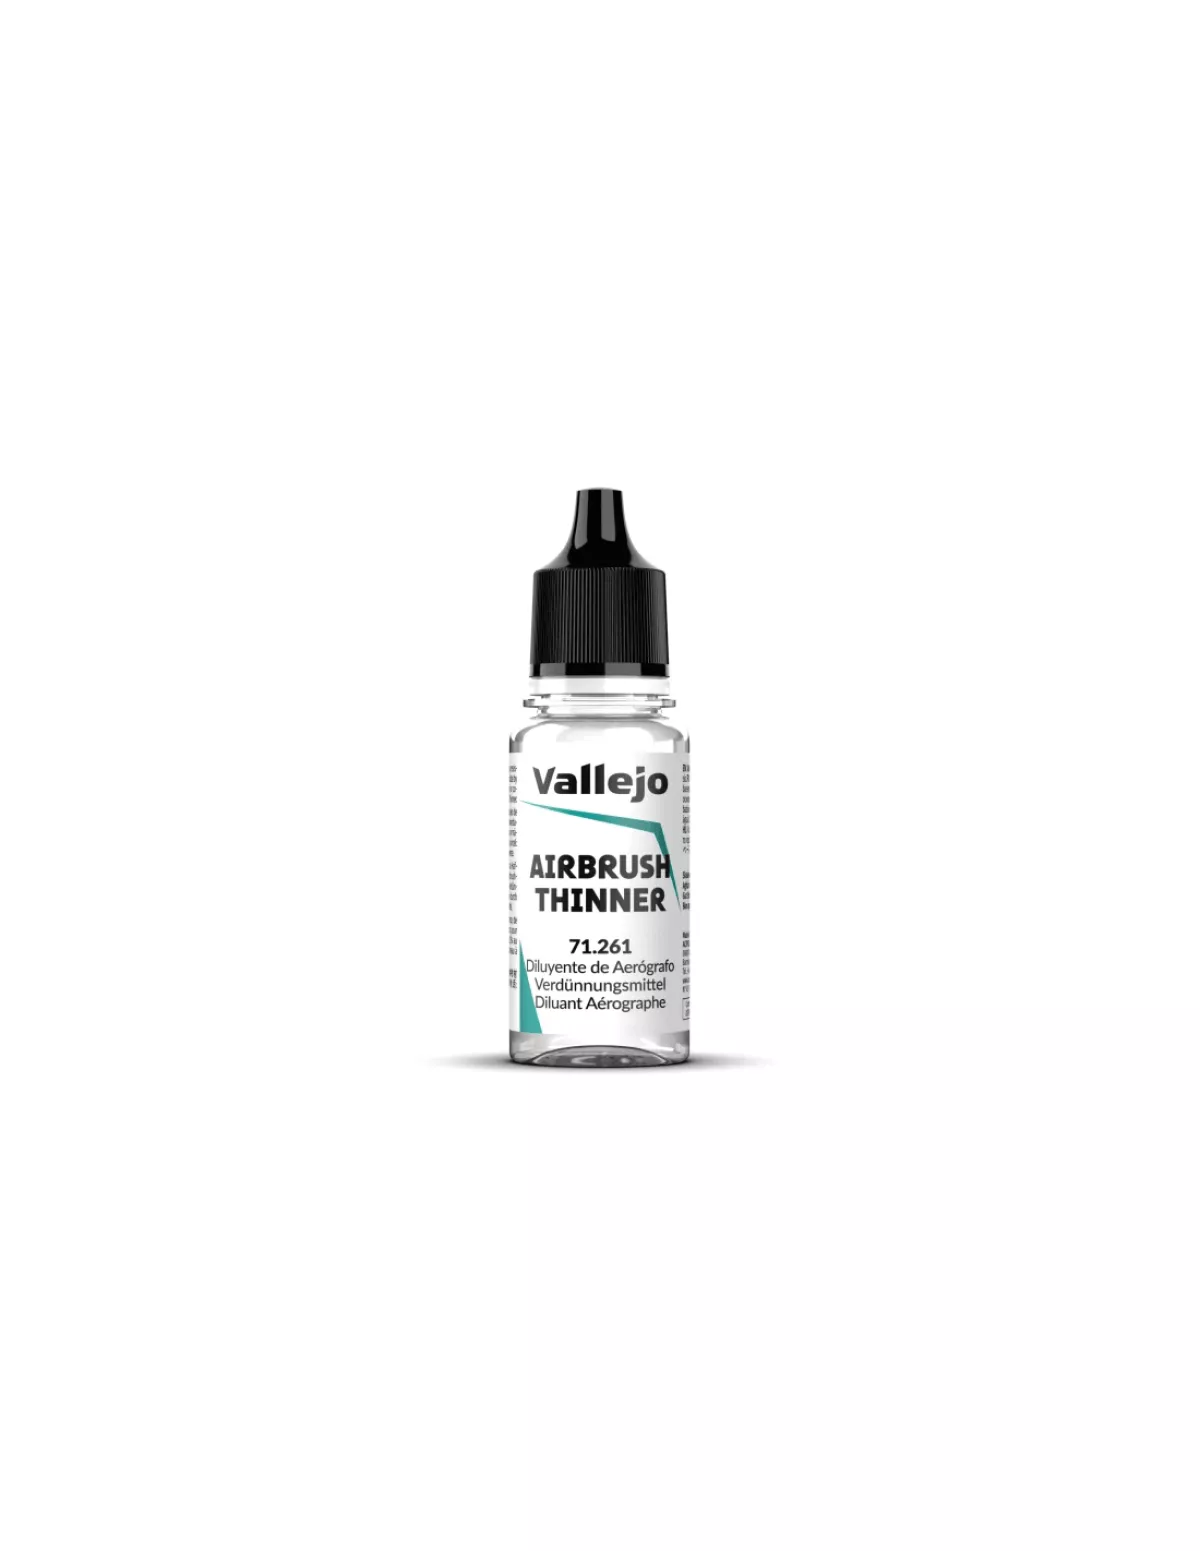 #1 - Airbrush Thinner - Auxiliary products - Game Color - Vallejo